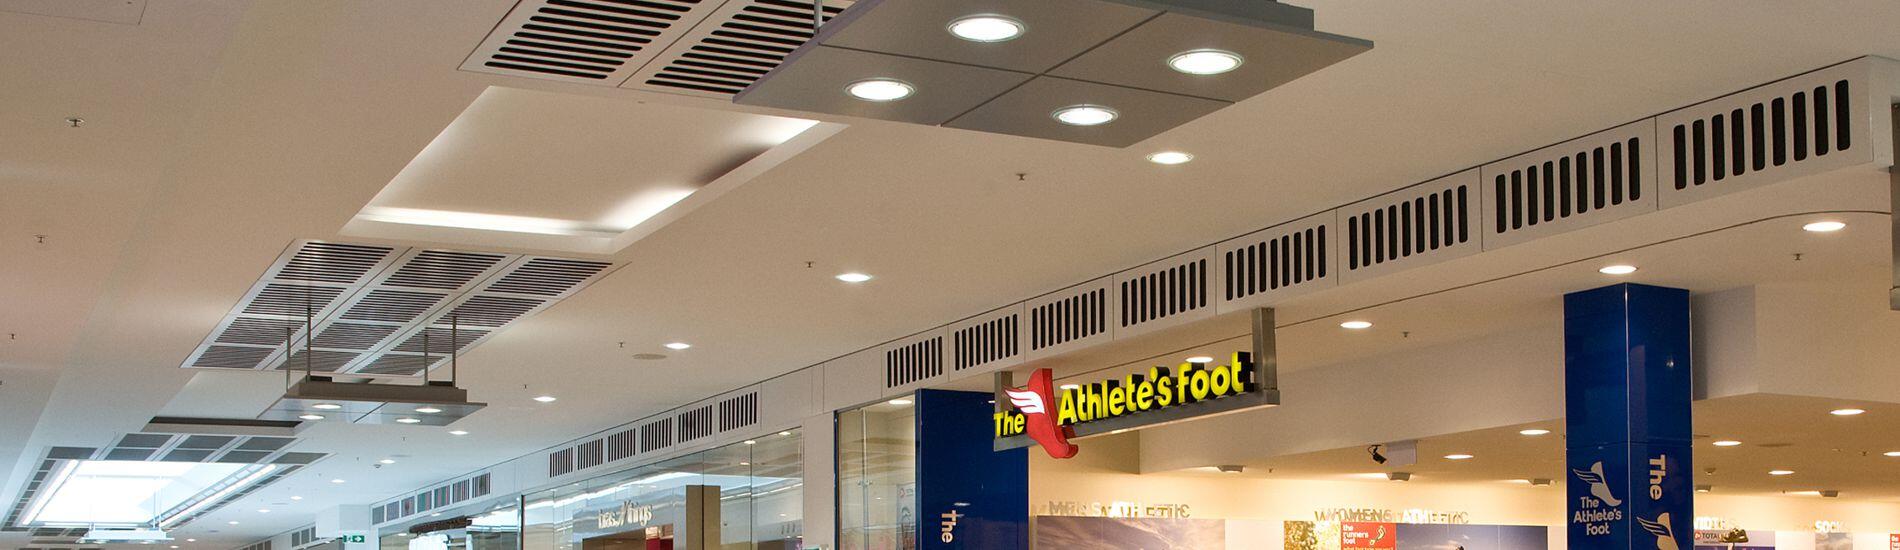 SUPACOUSTIC custom slotted panels help to integrate air flow in shopping centre